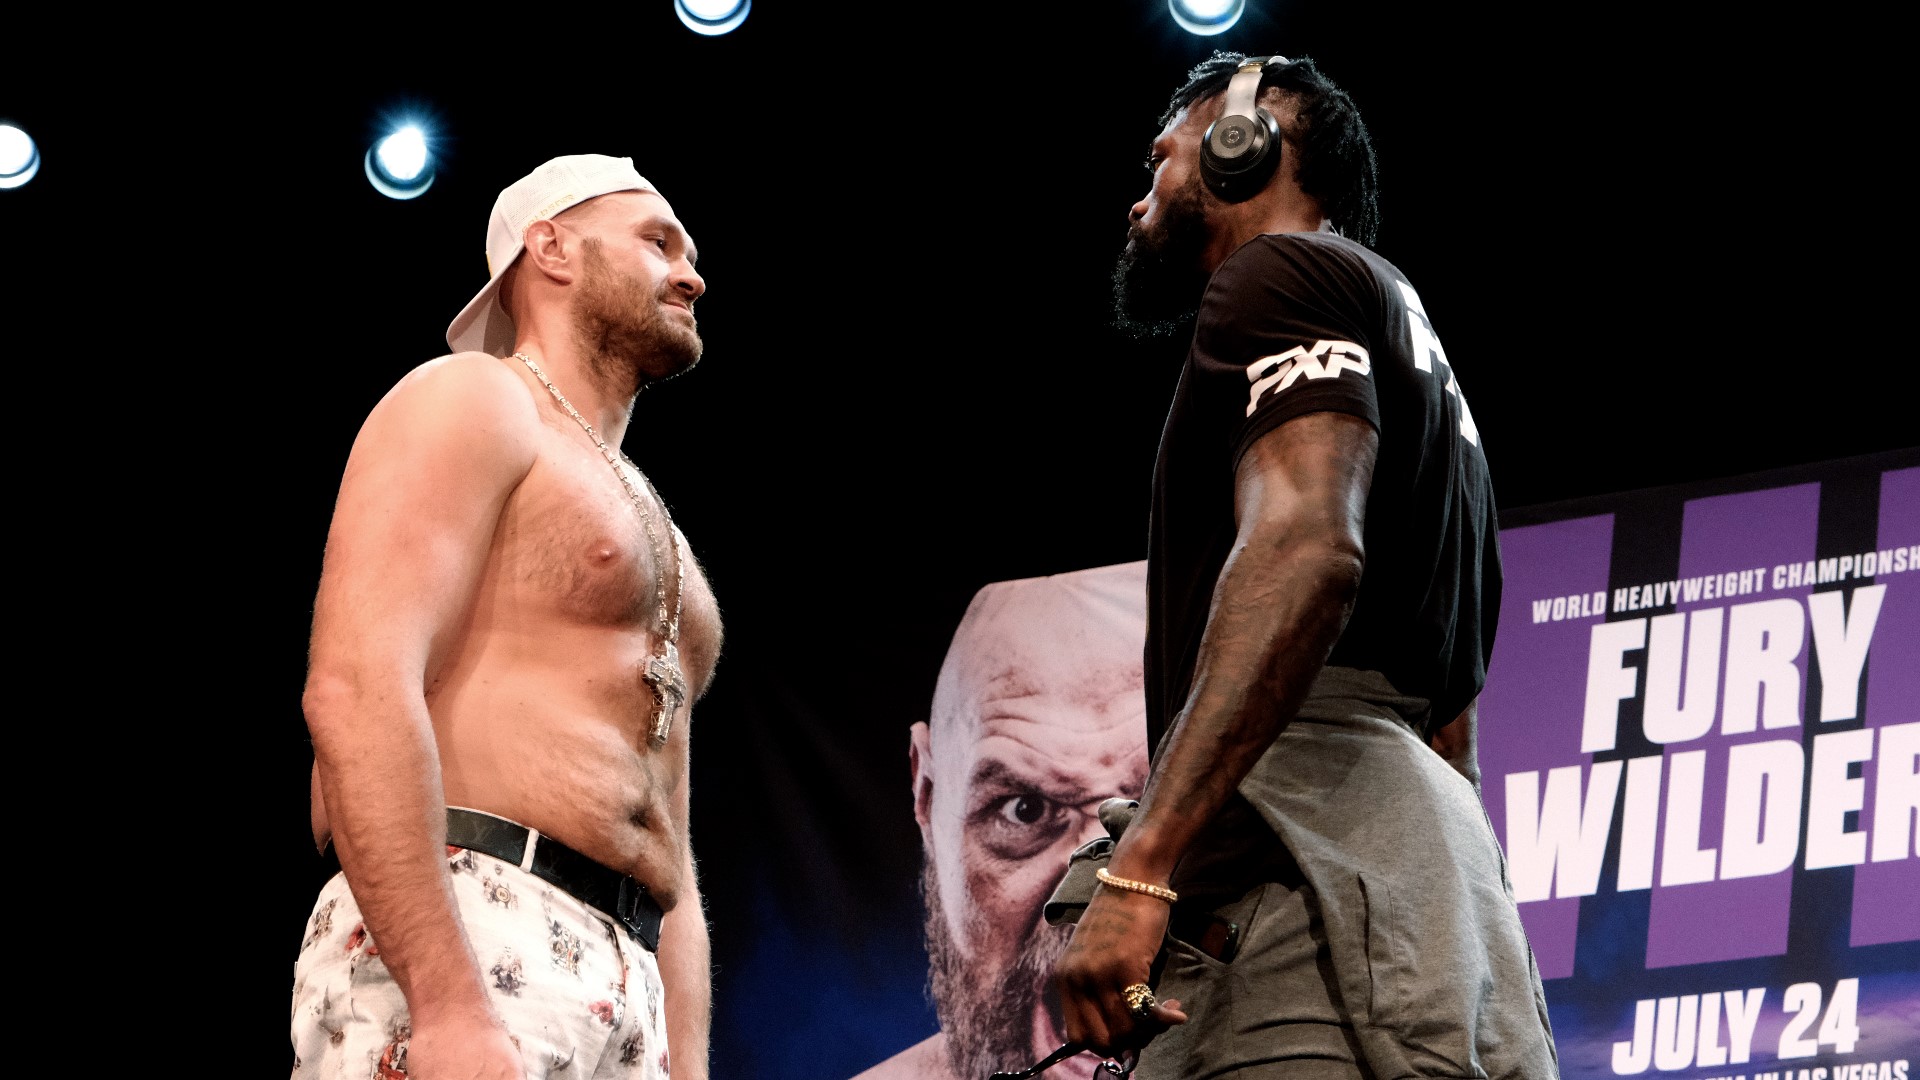 Tyson Fury's third heavyweight title fight with Tuscaloosa native Deontay Wilder has been postponed to Oct. 9 after Fury tested positive for COVID-19.